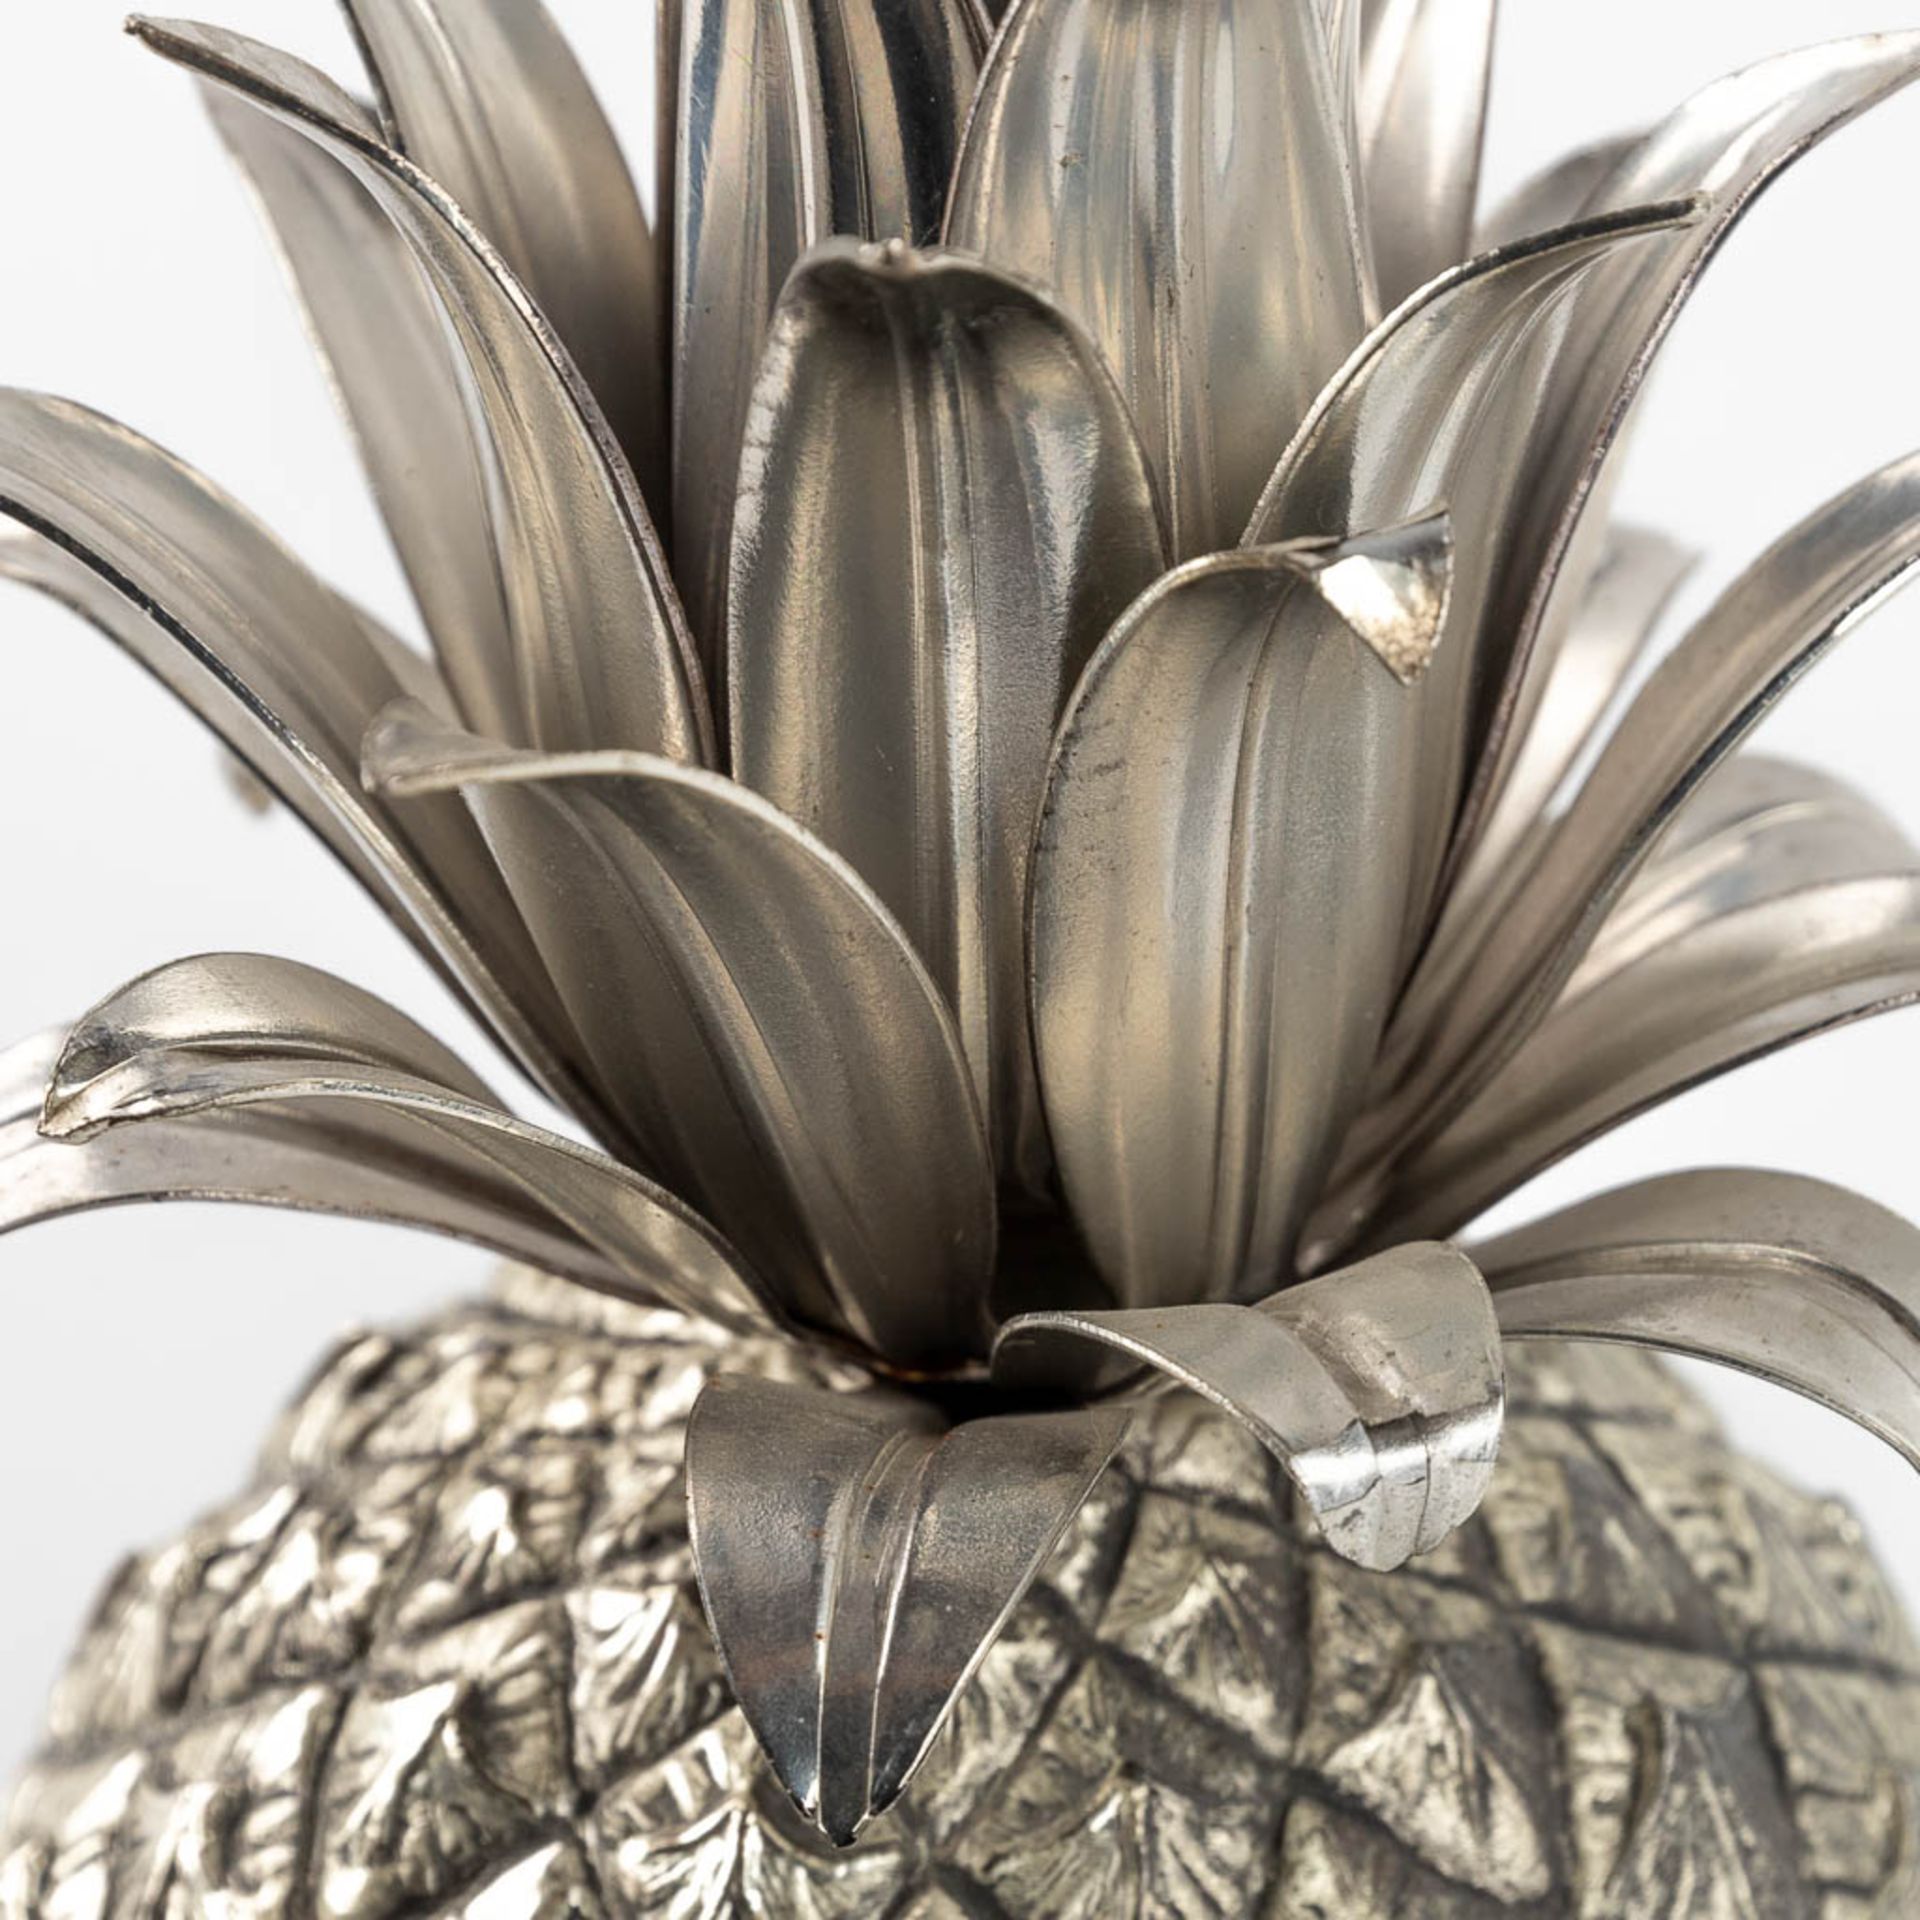 Mauro MANETTI (1946) 'Pineapple' an ice pail. (H:26 x D:14 cm) - Image 6 of 13